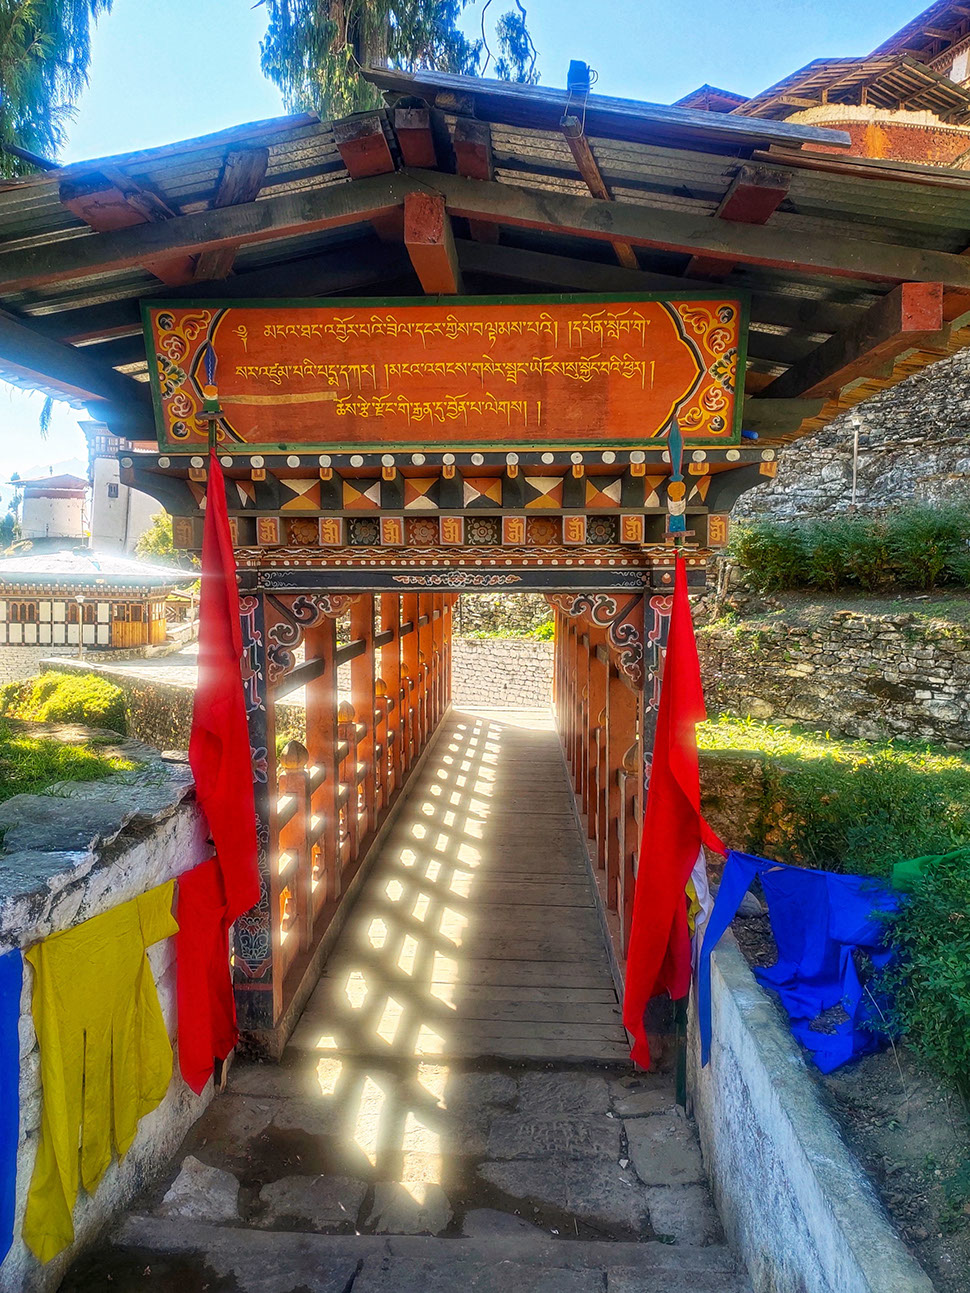 The wooden bridge entrance to Trongsa Dzong with decorative flags